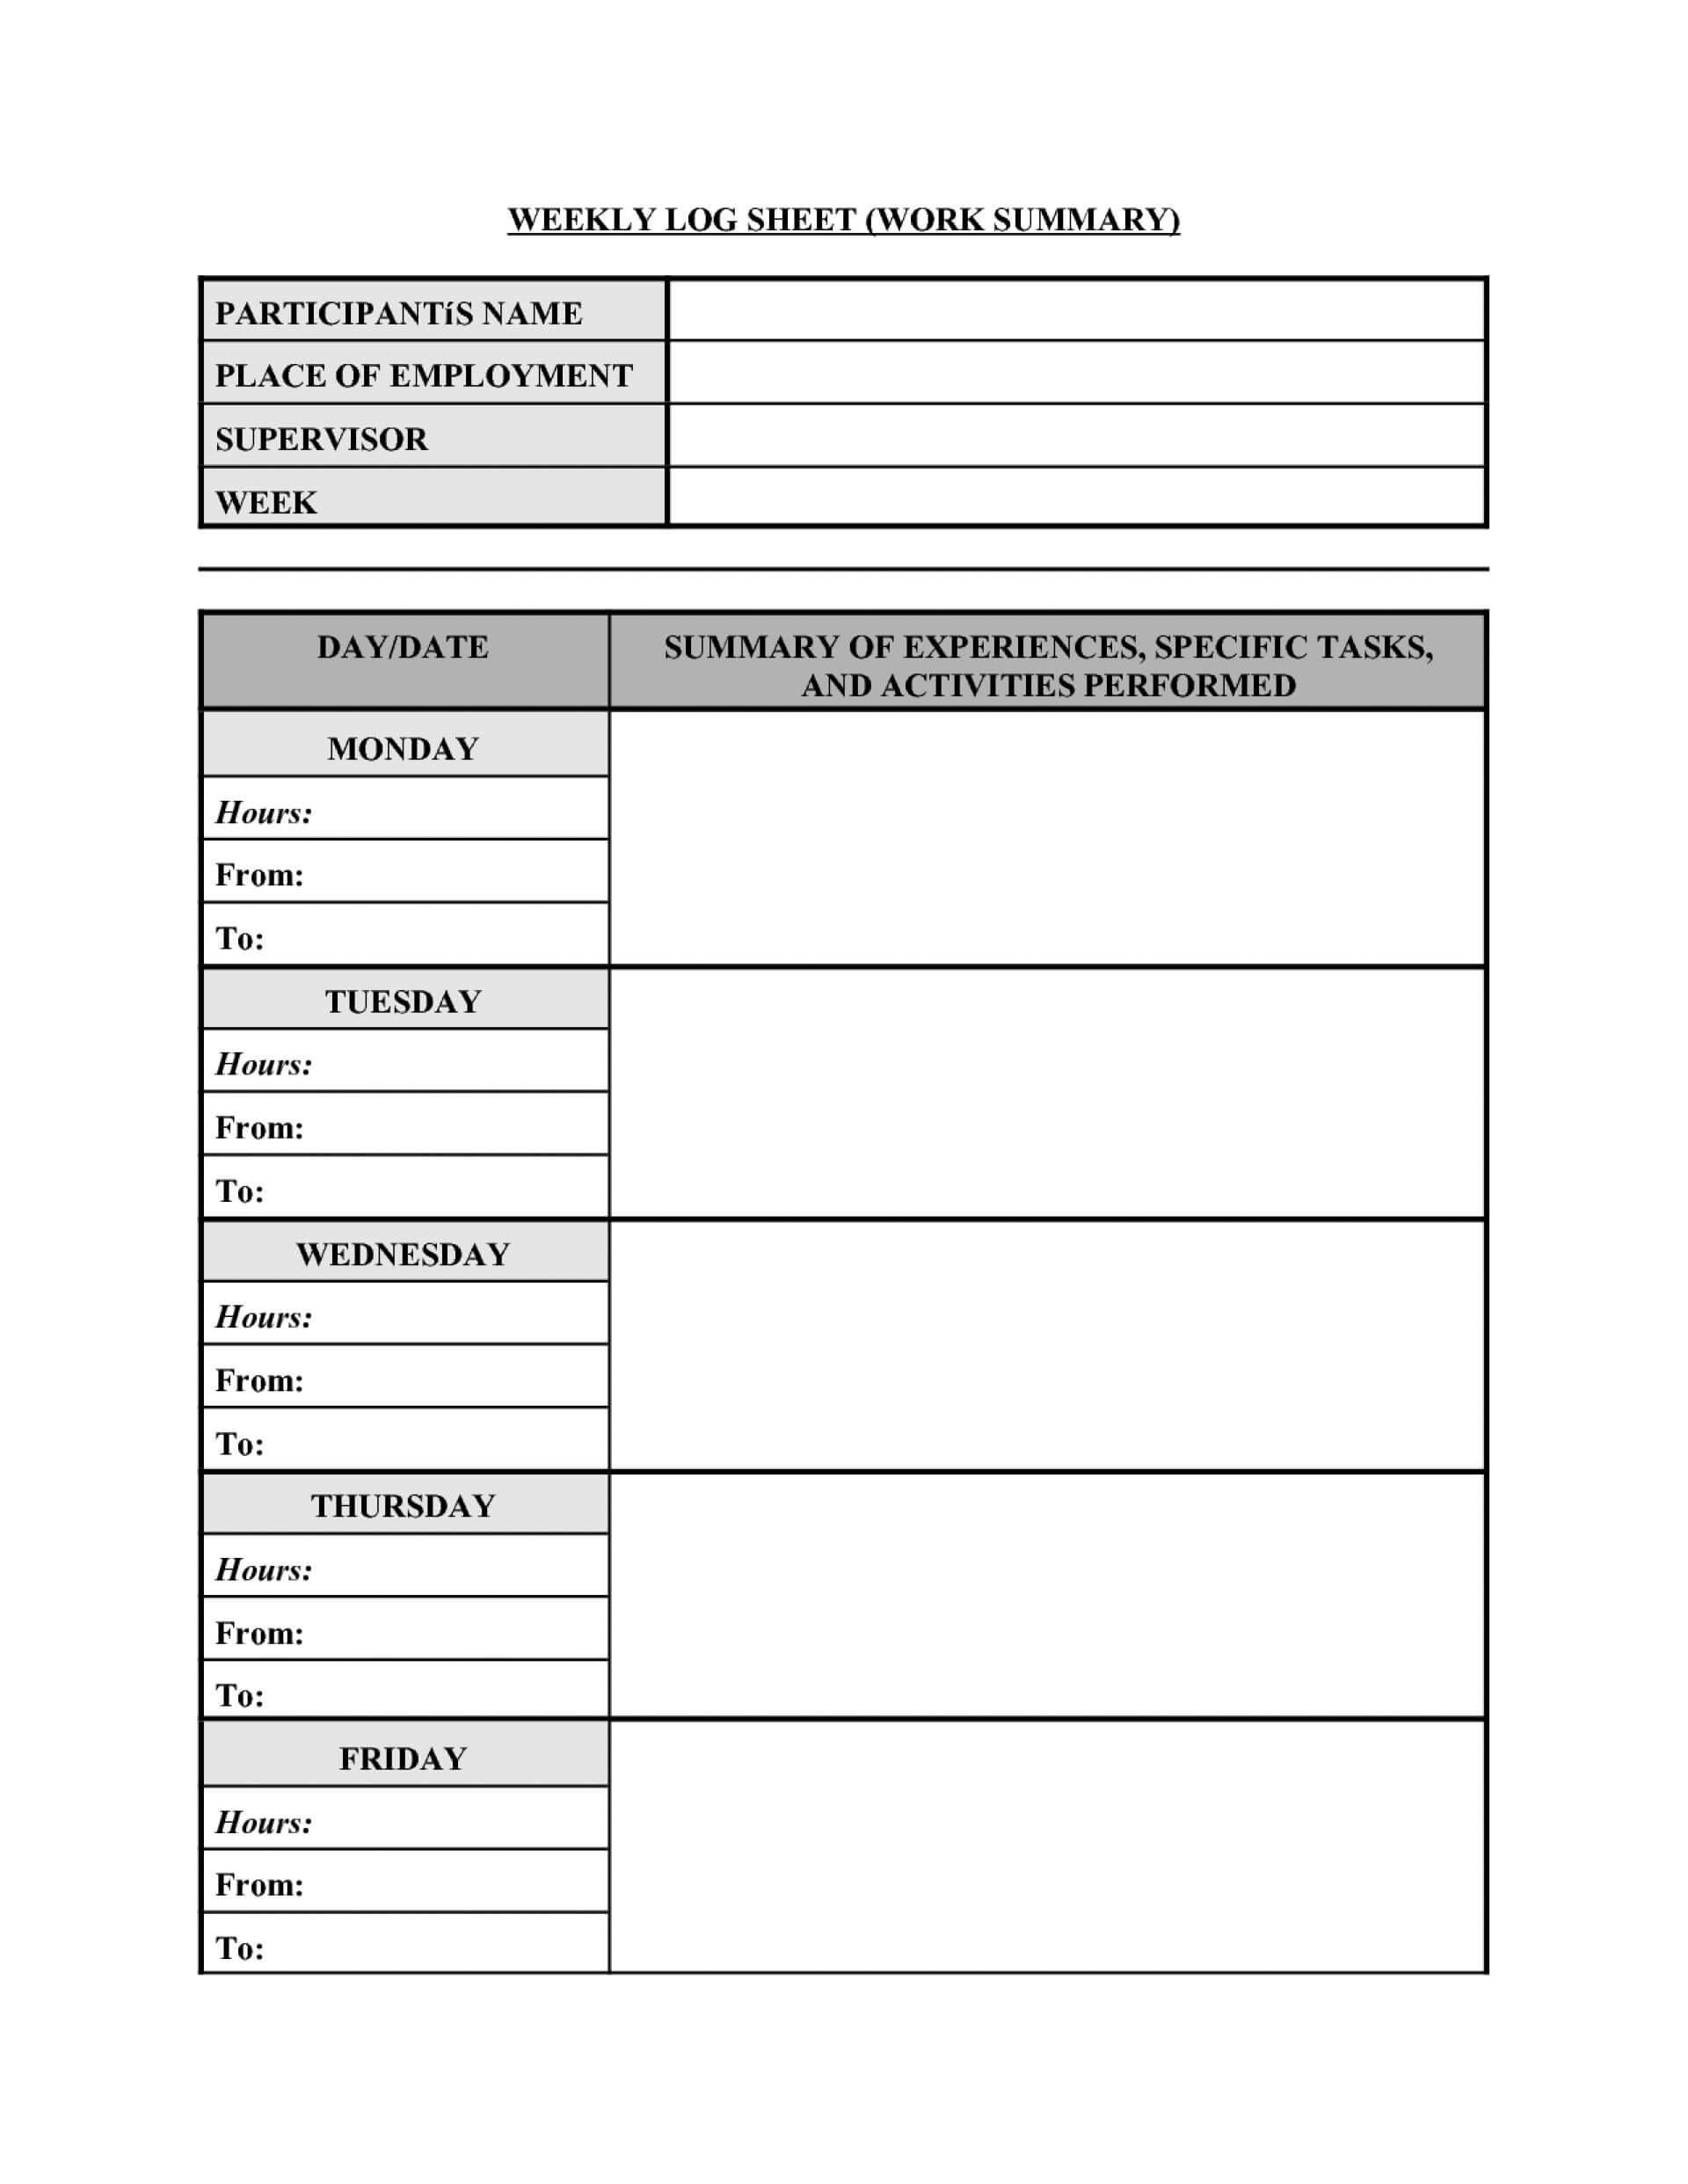 Fantastic Weekly Activities Report Template Ideas Activity For Work Summary Report Template